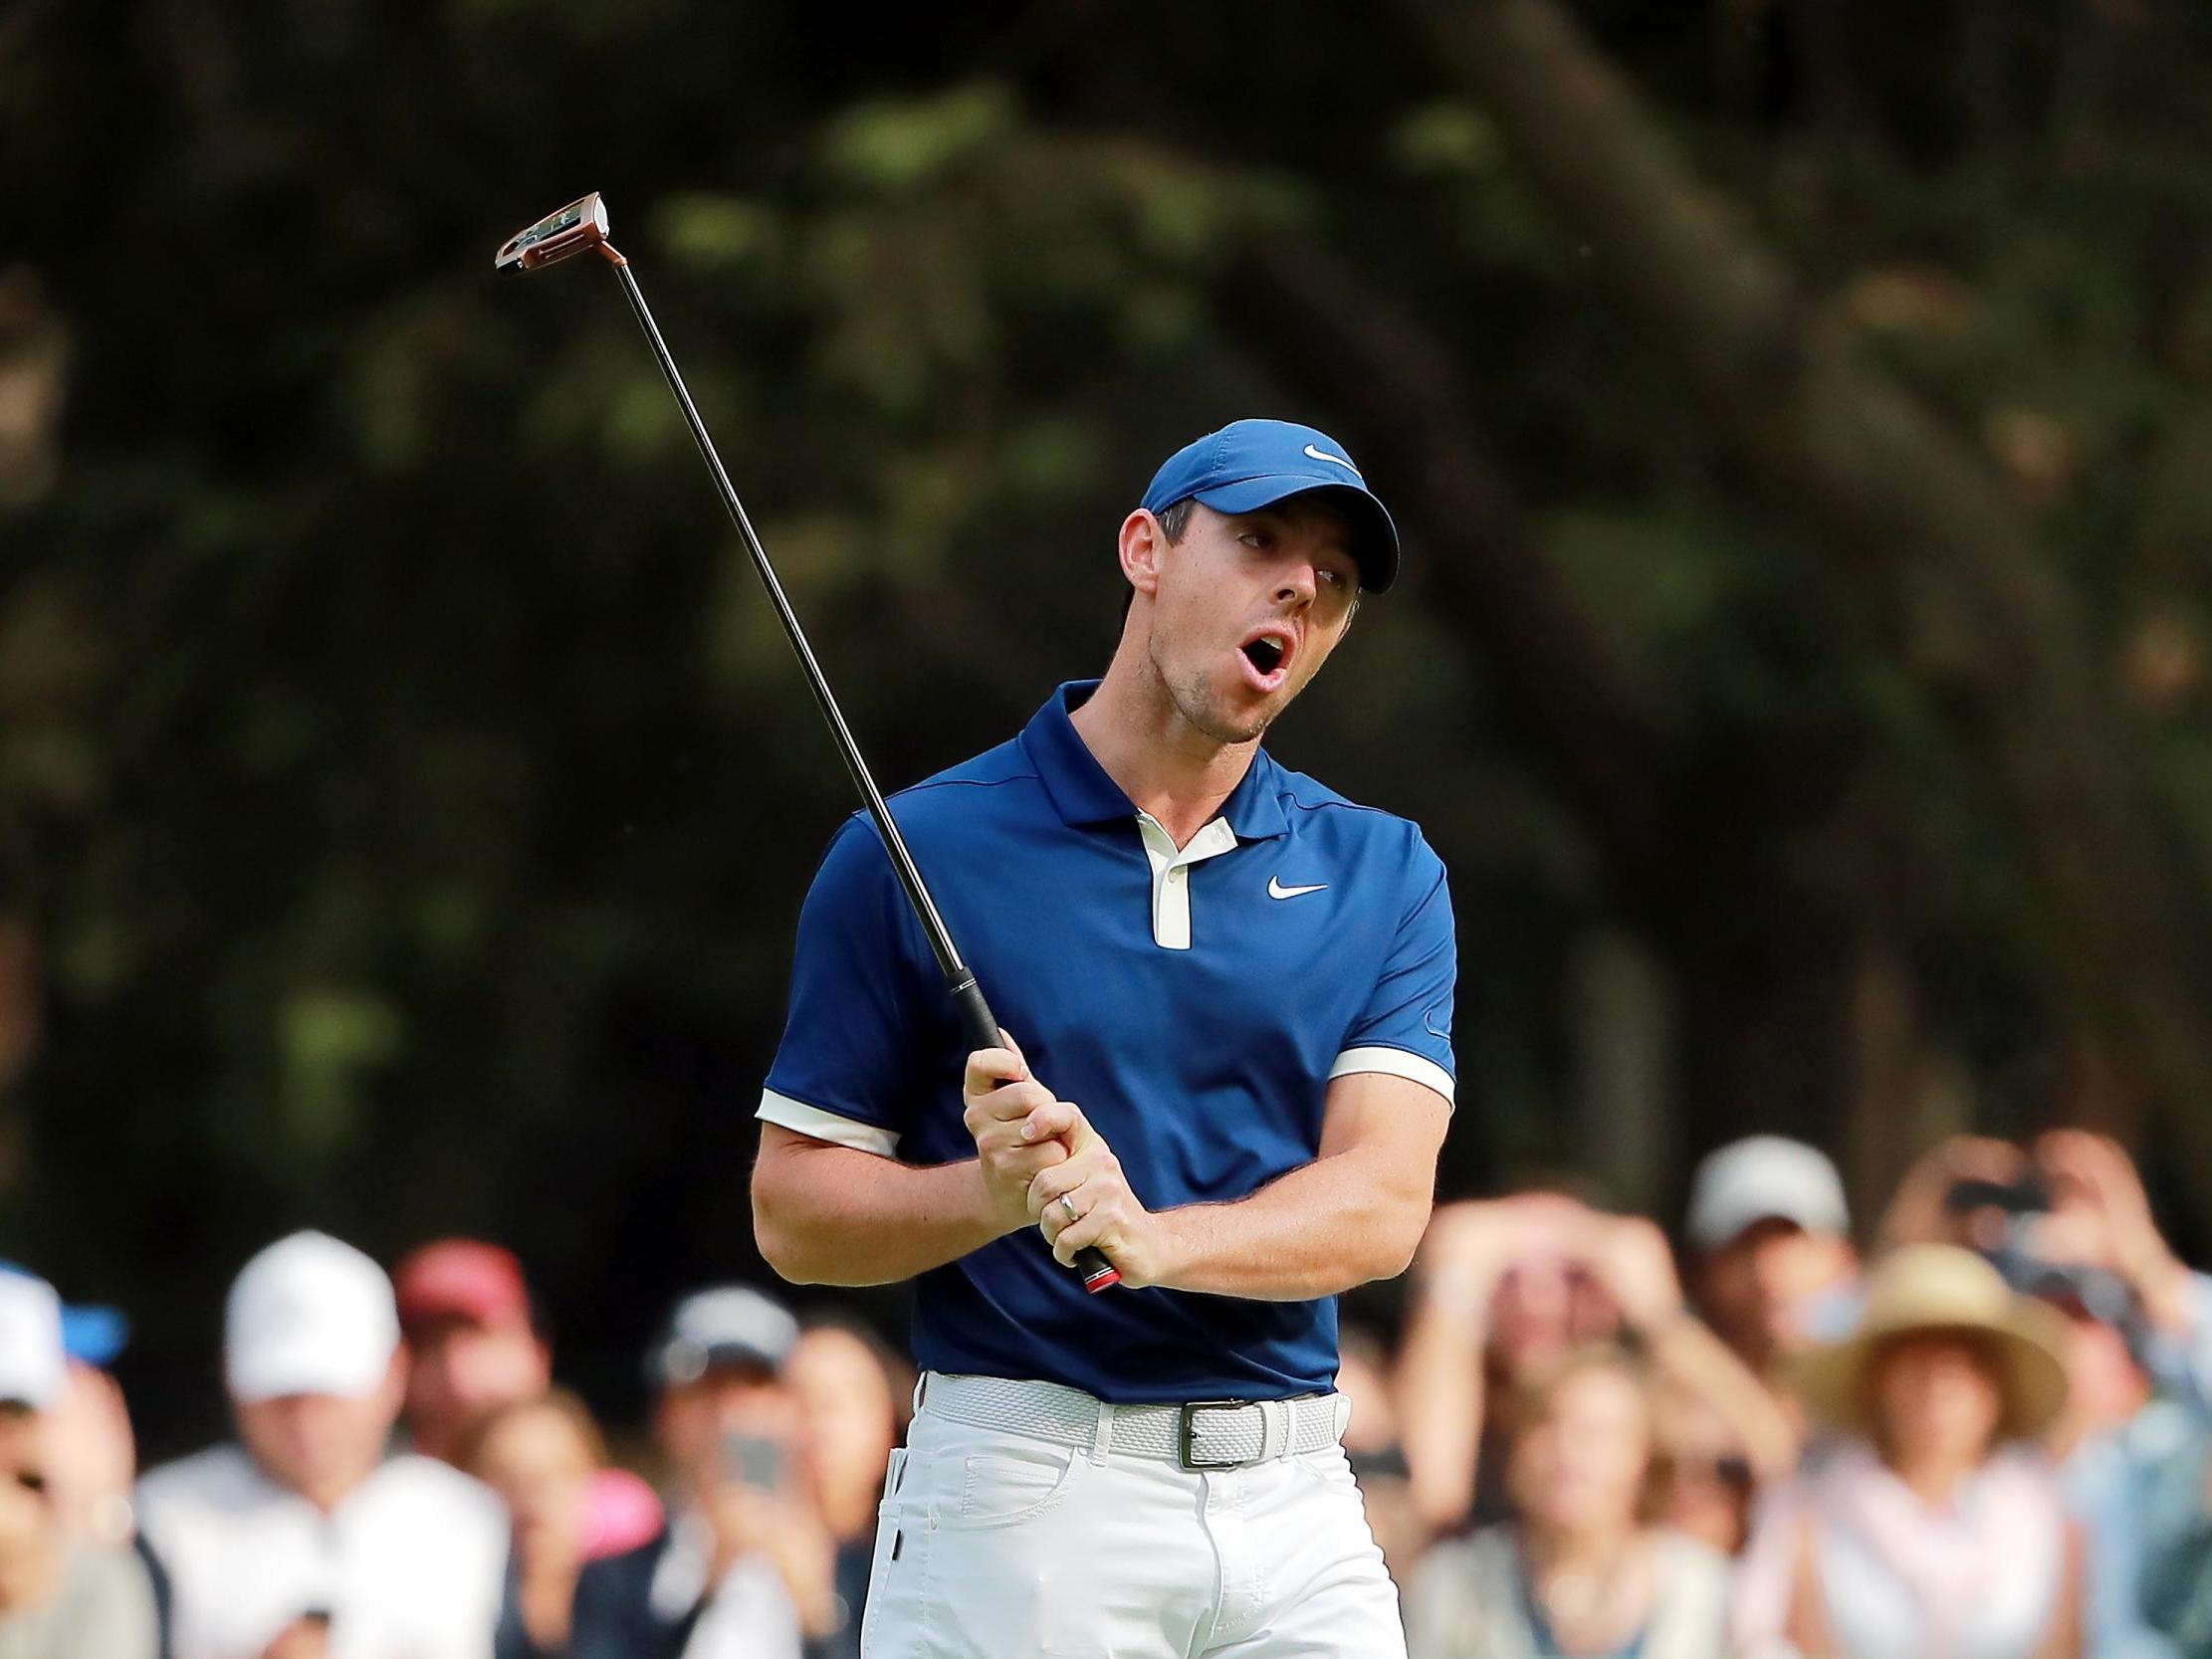 Rory McIlroy reacts on the 15th green during the third round